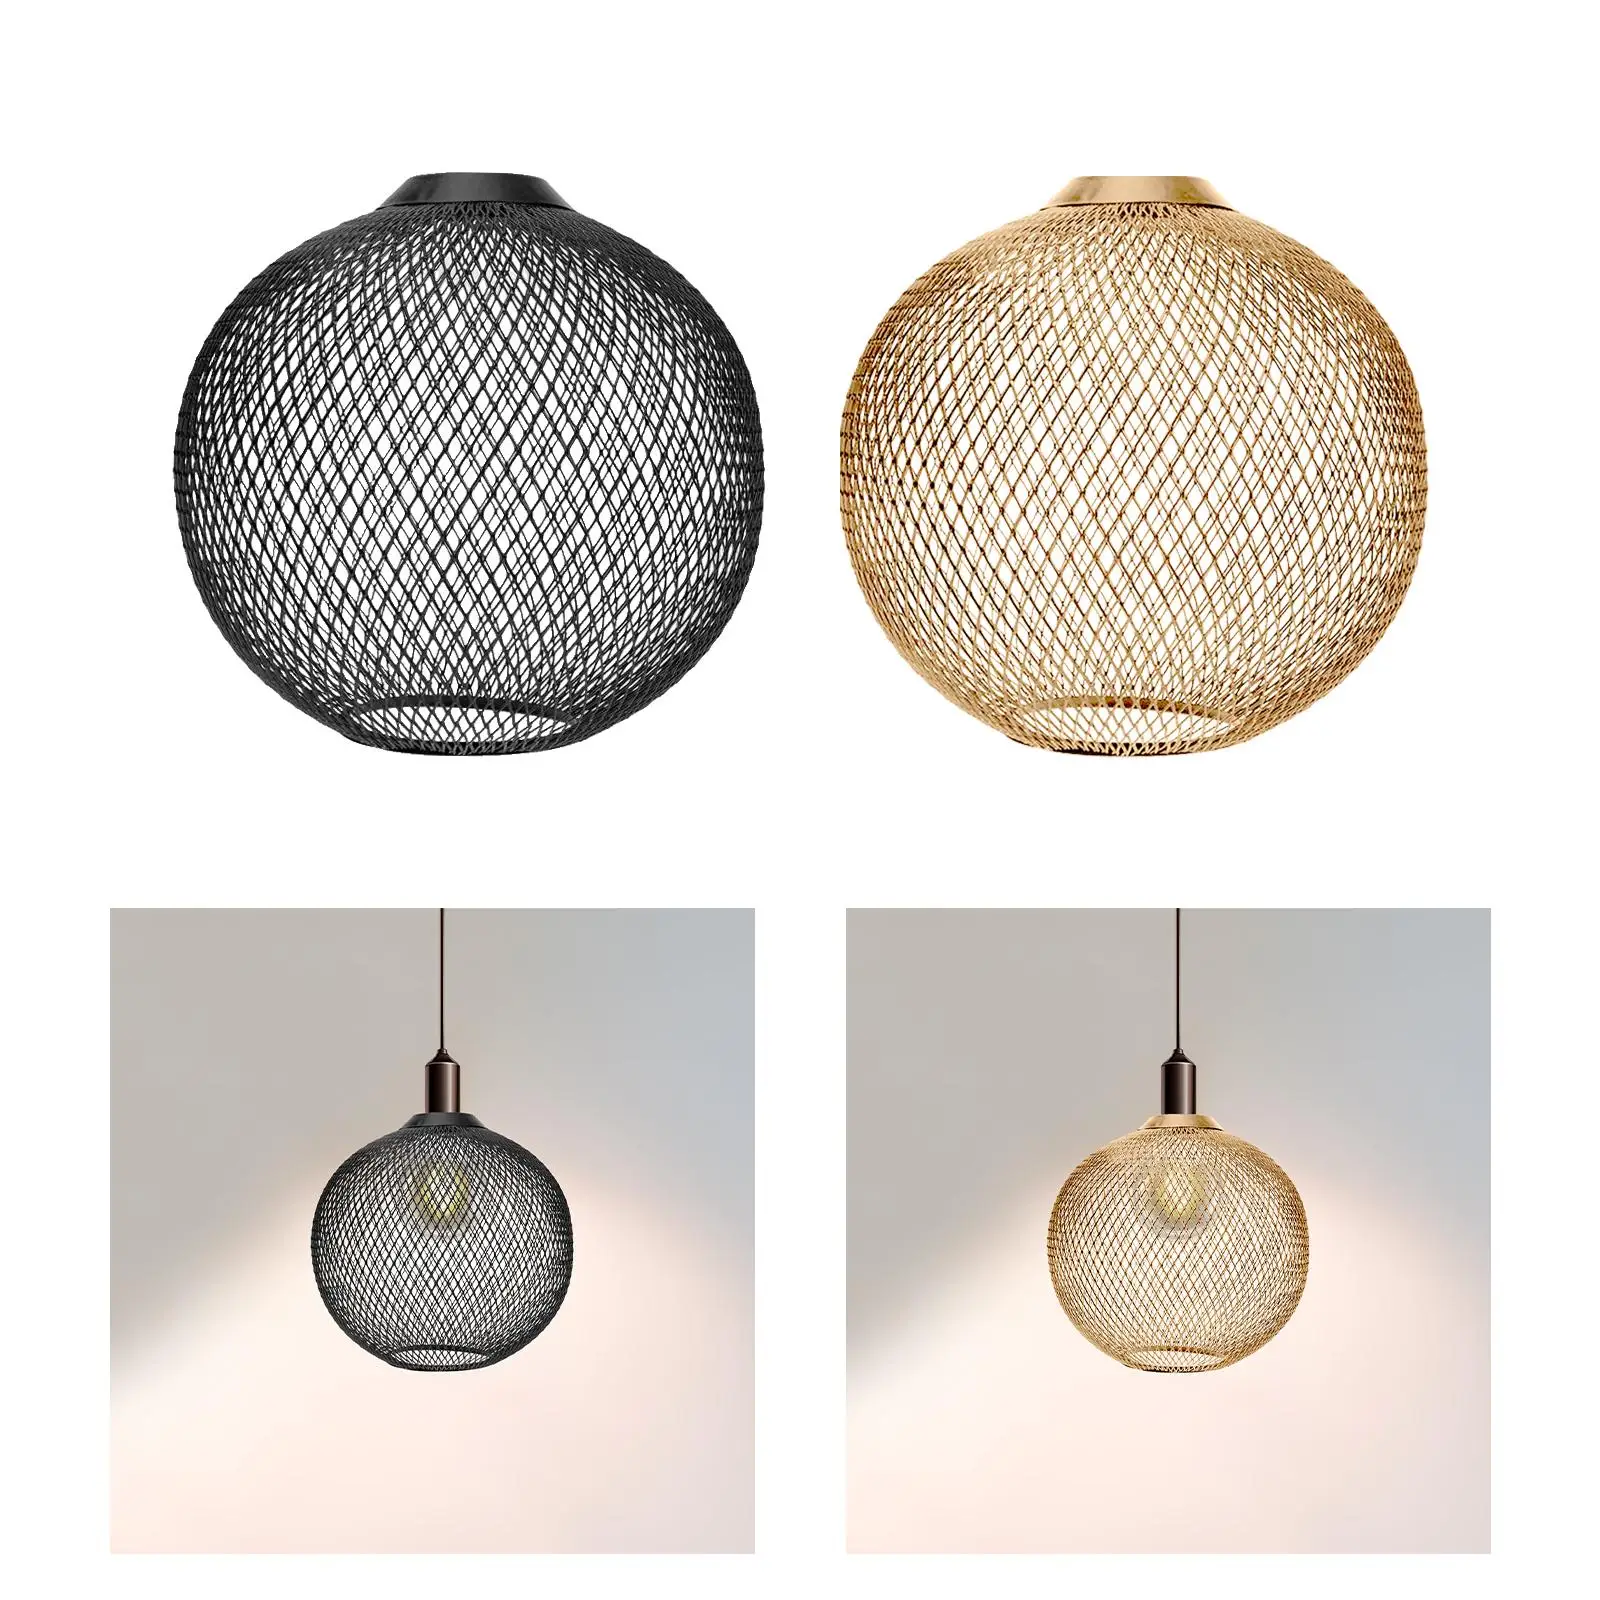 Hollow Out Metal Pendant Lamp Shade Hanging Light Cover Bulb Guard Lampshade for Restaurant Hotel Cafe Living Room Decor